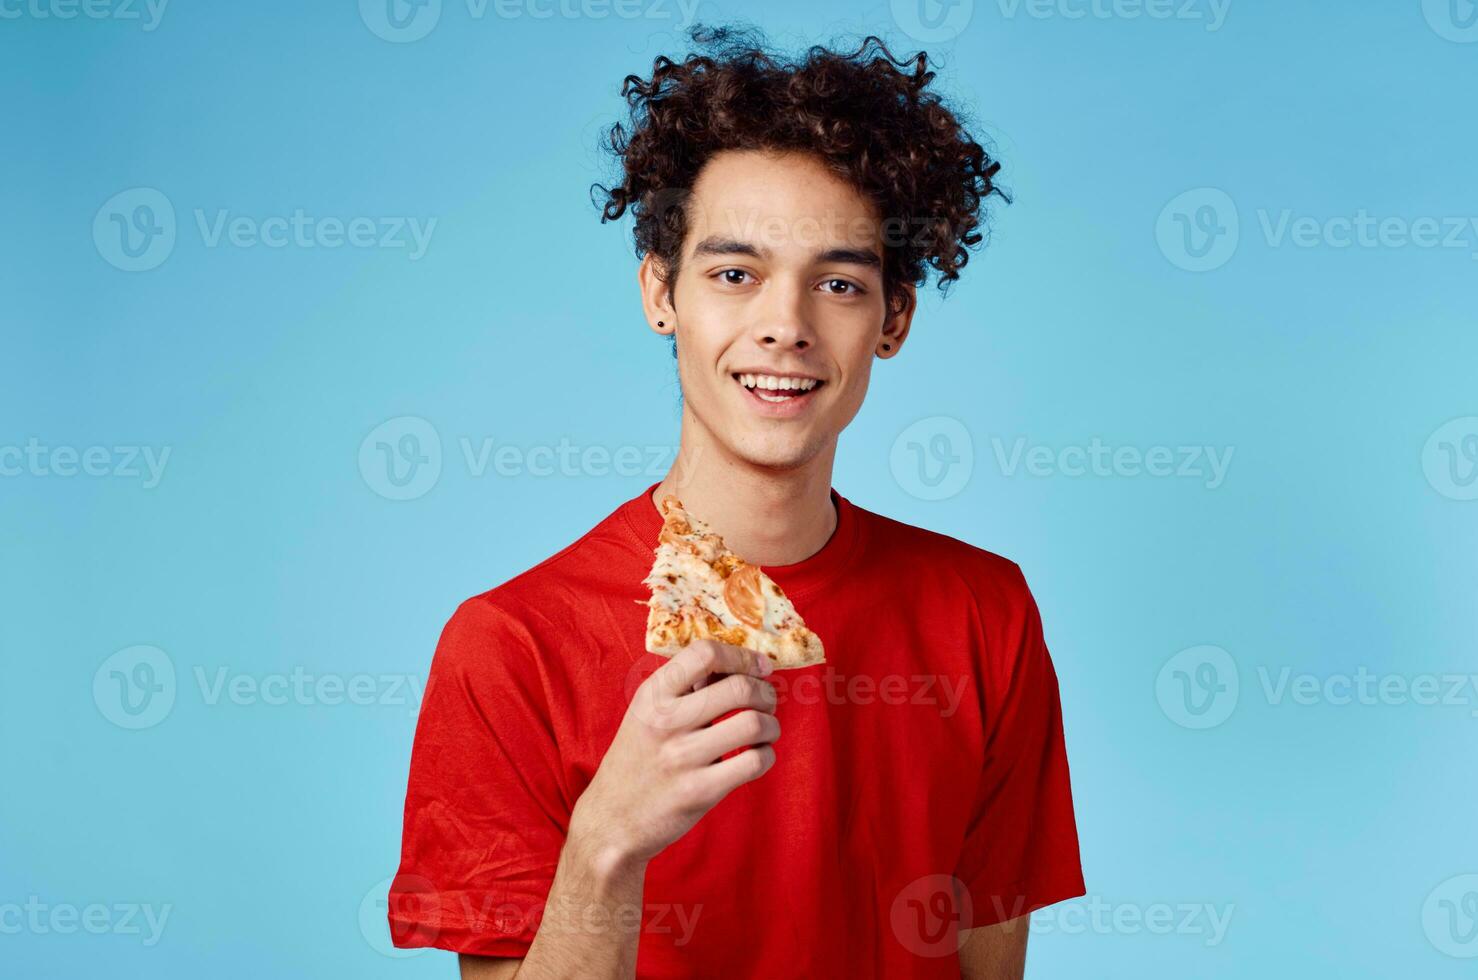 guy where is he and hair in a red t-shirt with a slice of pizza on a blue background photo